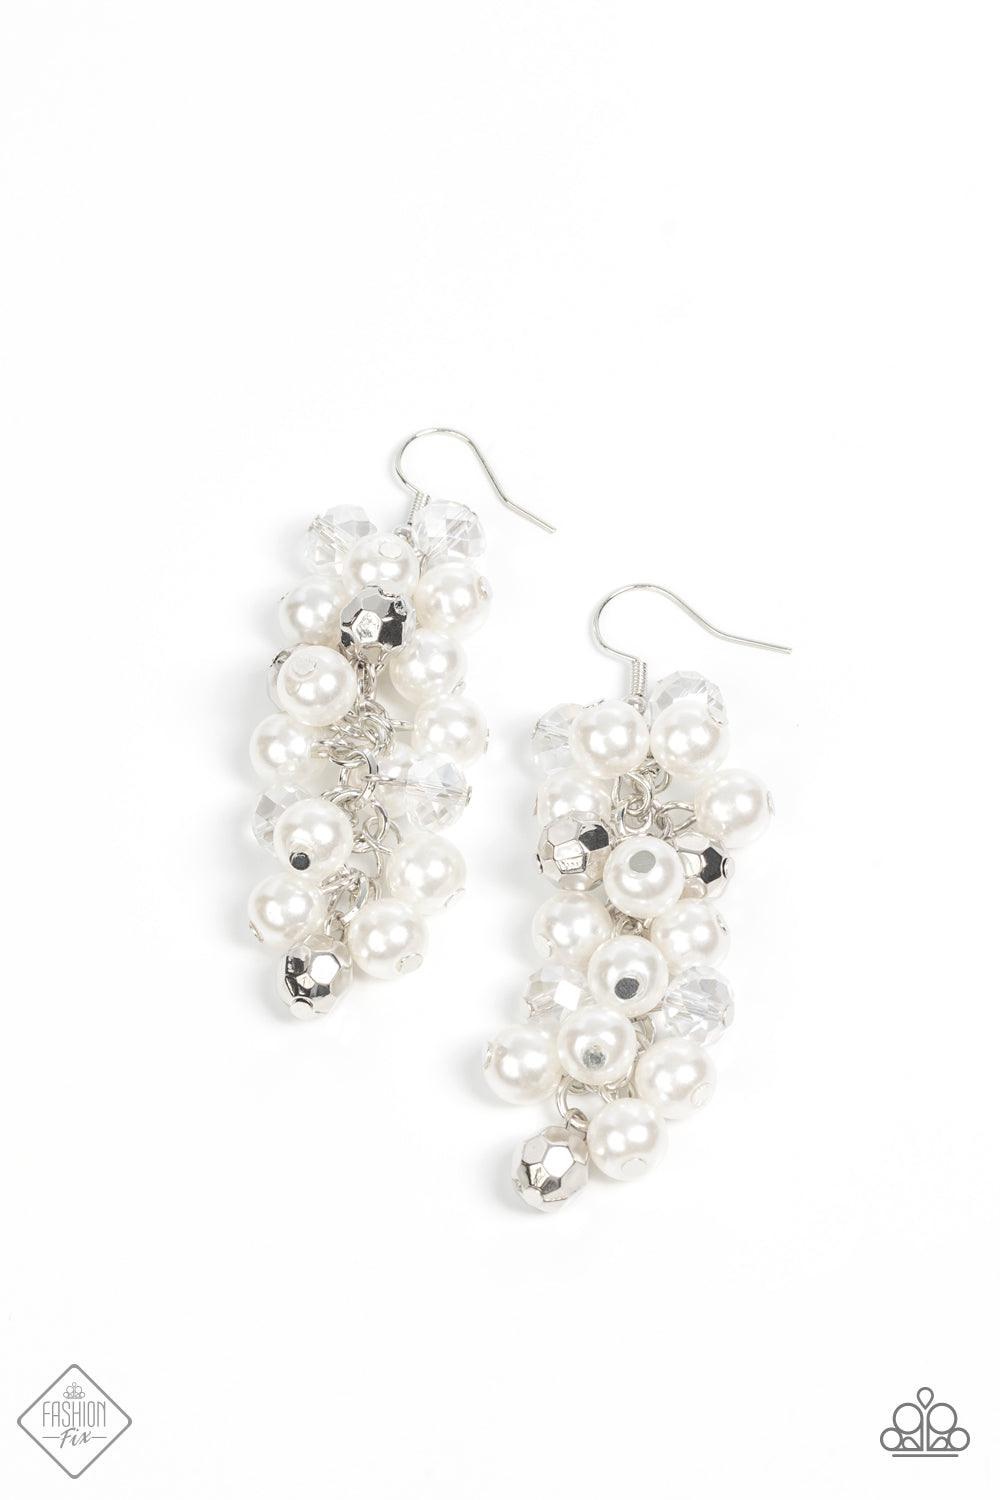 Pursuing Perfection White Pearl Earring - Paparazzi Accessories  A sprinkle of faceted iridescent and silver beads mingle with a cluster of dreamy white pearls resulting in an elegant chandelier that sways below the ear. Earring attaches to a standard fishhook fitting.  Sold as one pair of earrings.